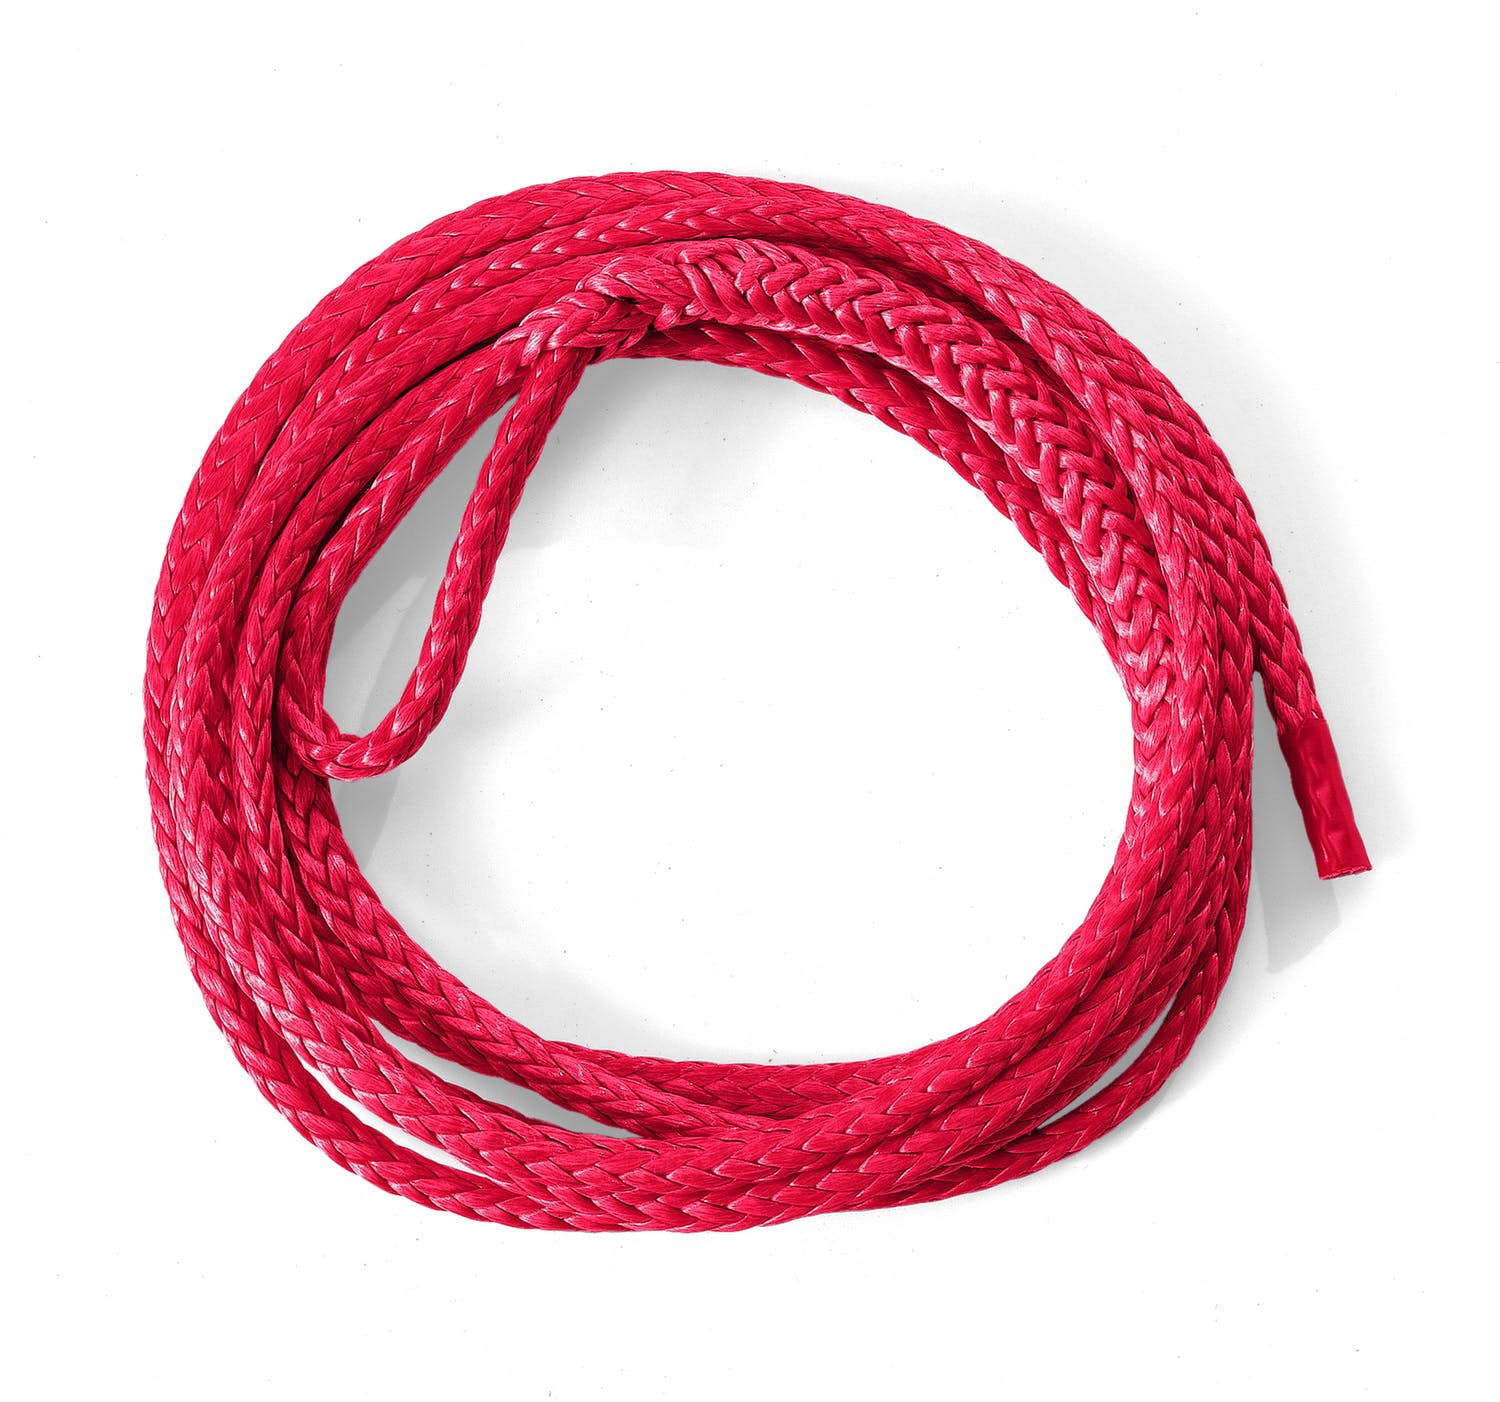 WARN 68560 Synthic Winch Rope 8